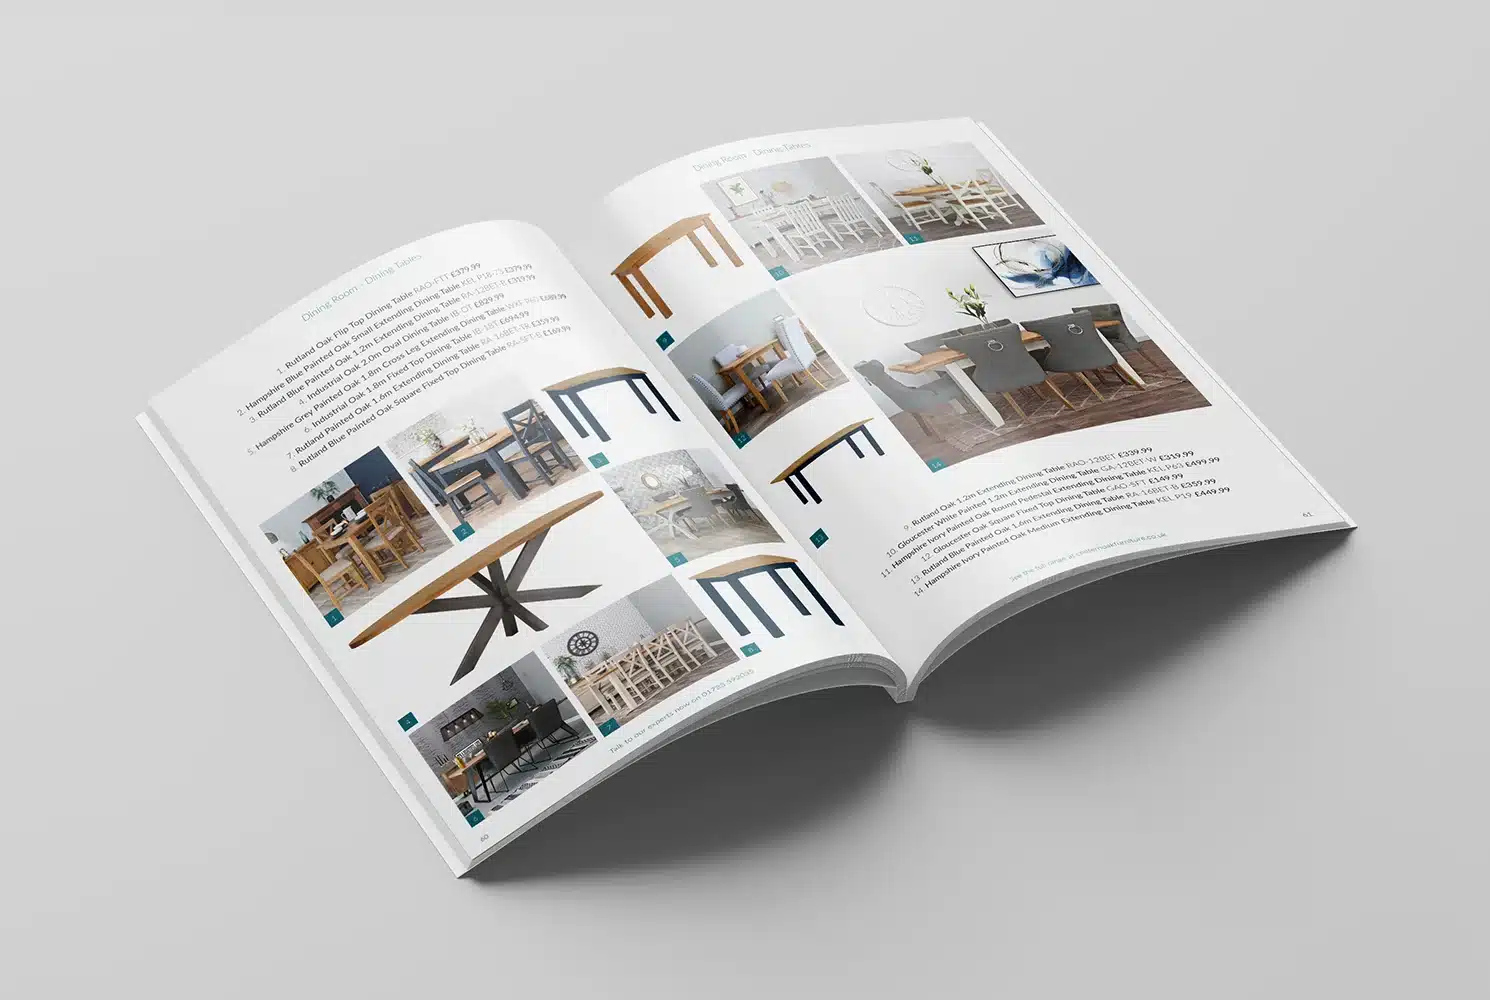 Mock up of a double page product spread of the Chiltern Oak furniture catalogue